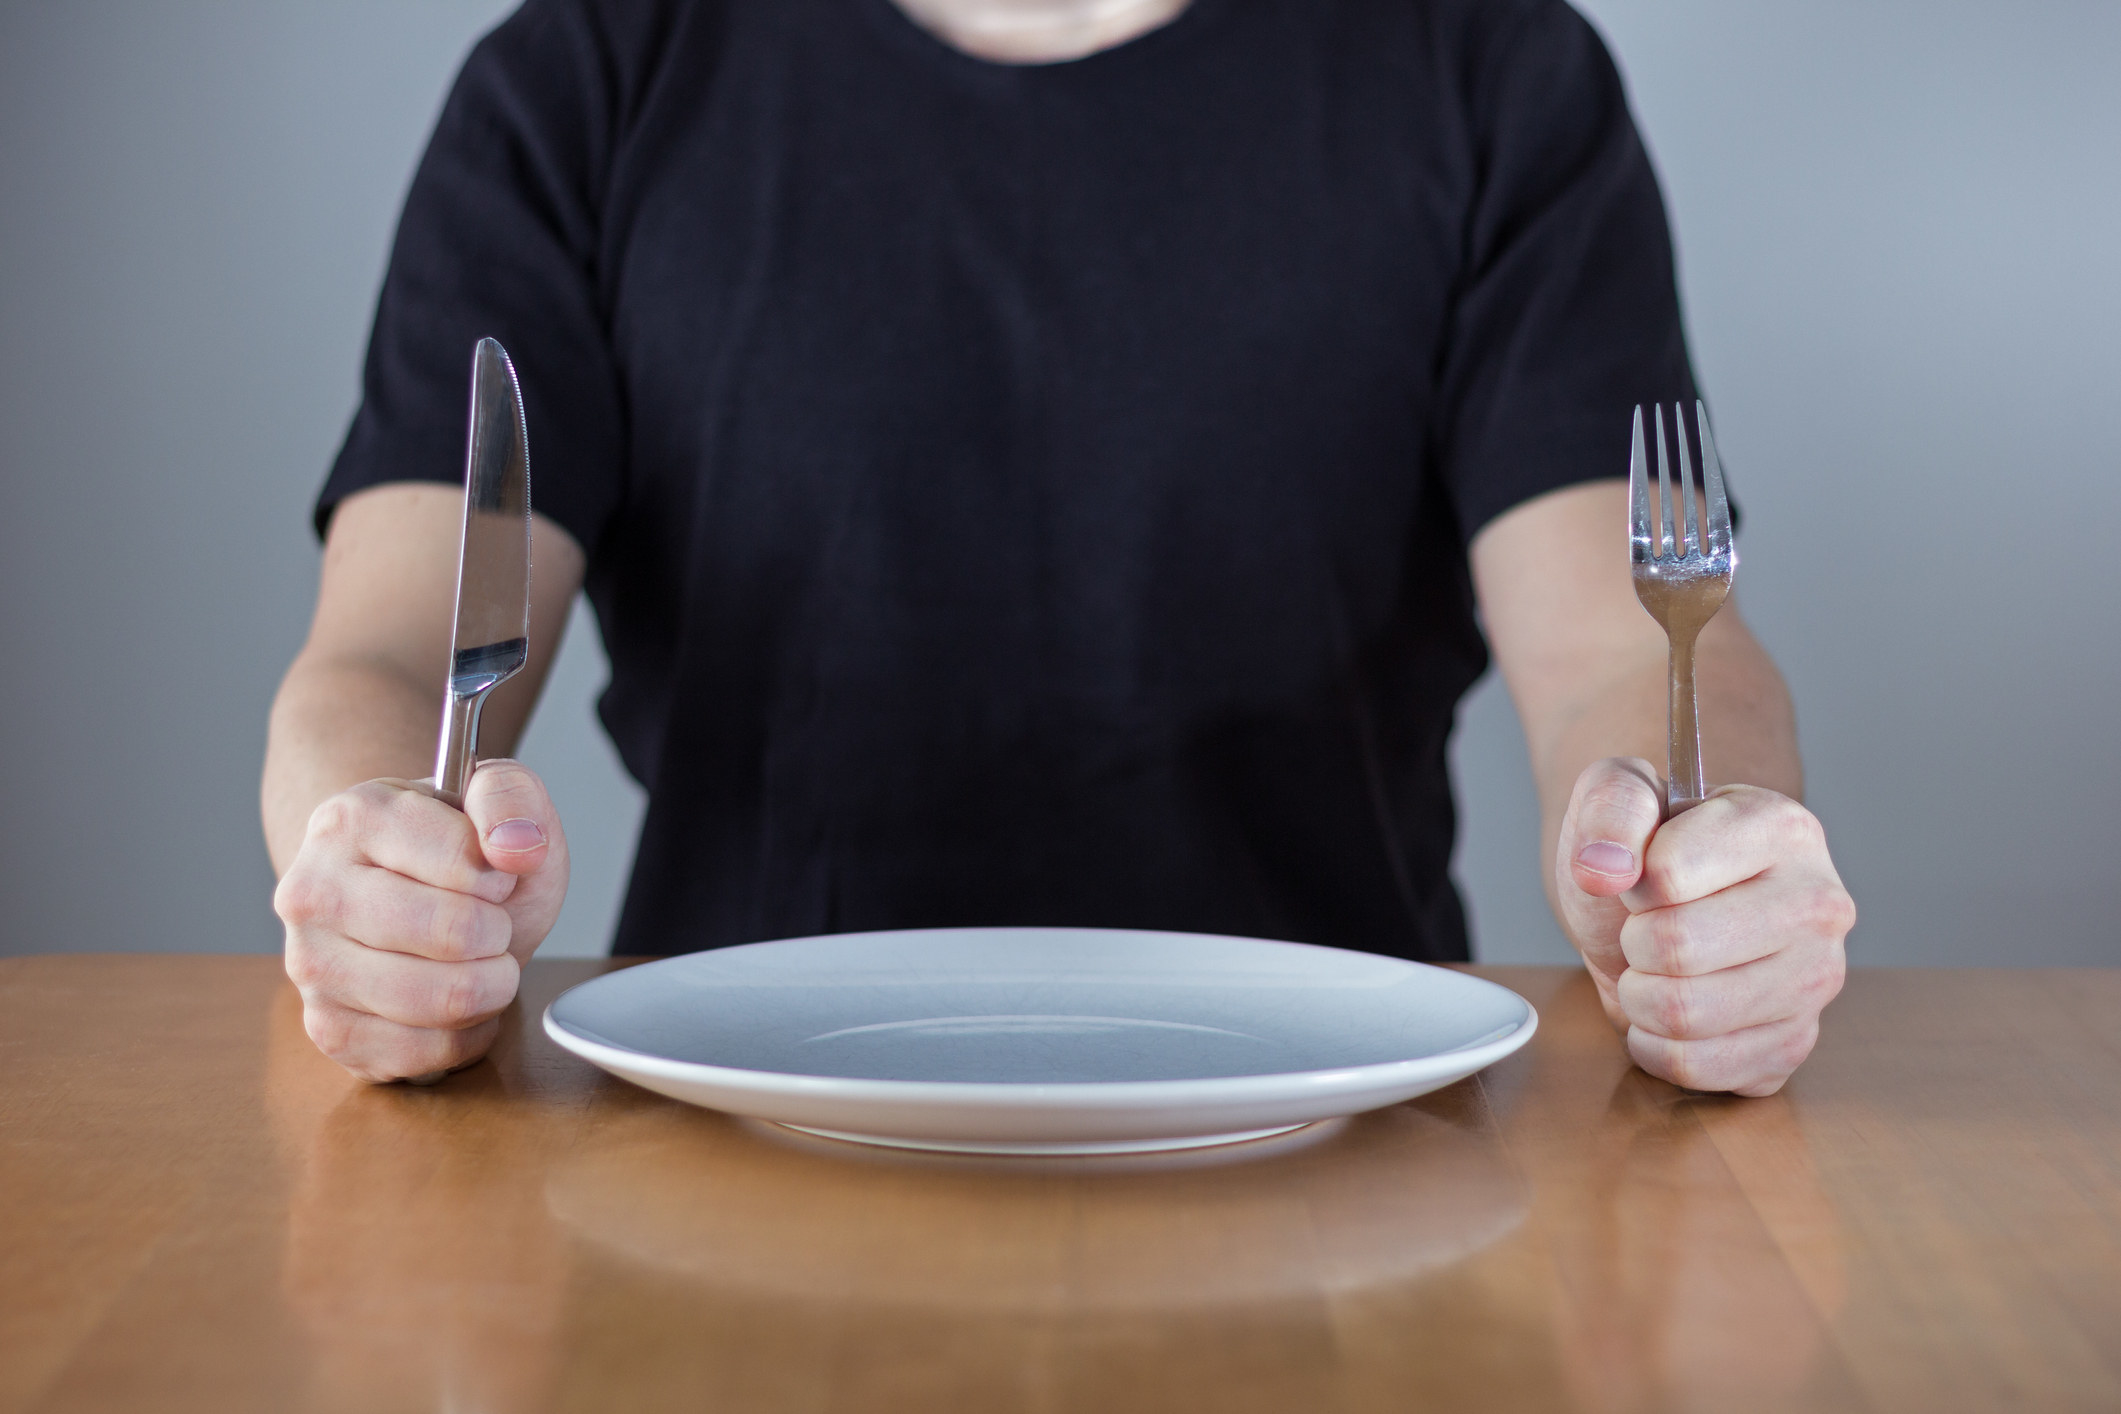 Someone holds a fork and knife, eagerly waiting dinner